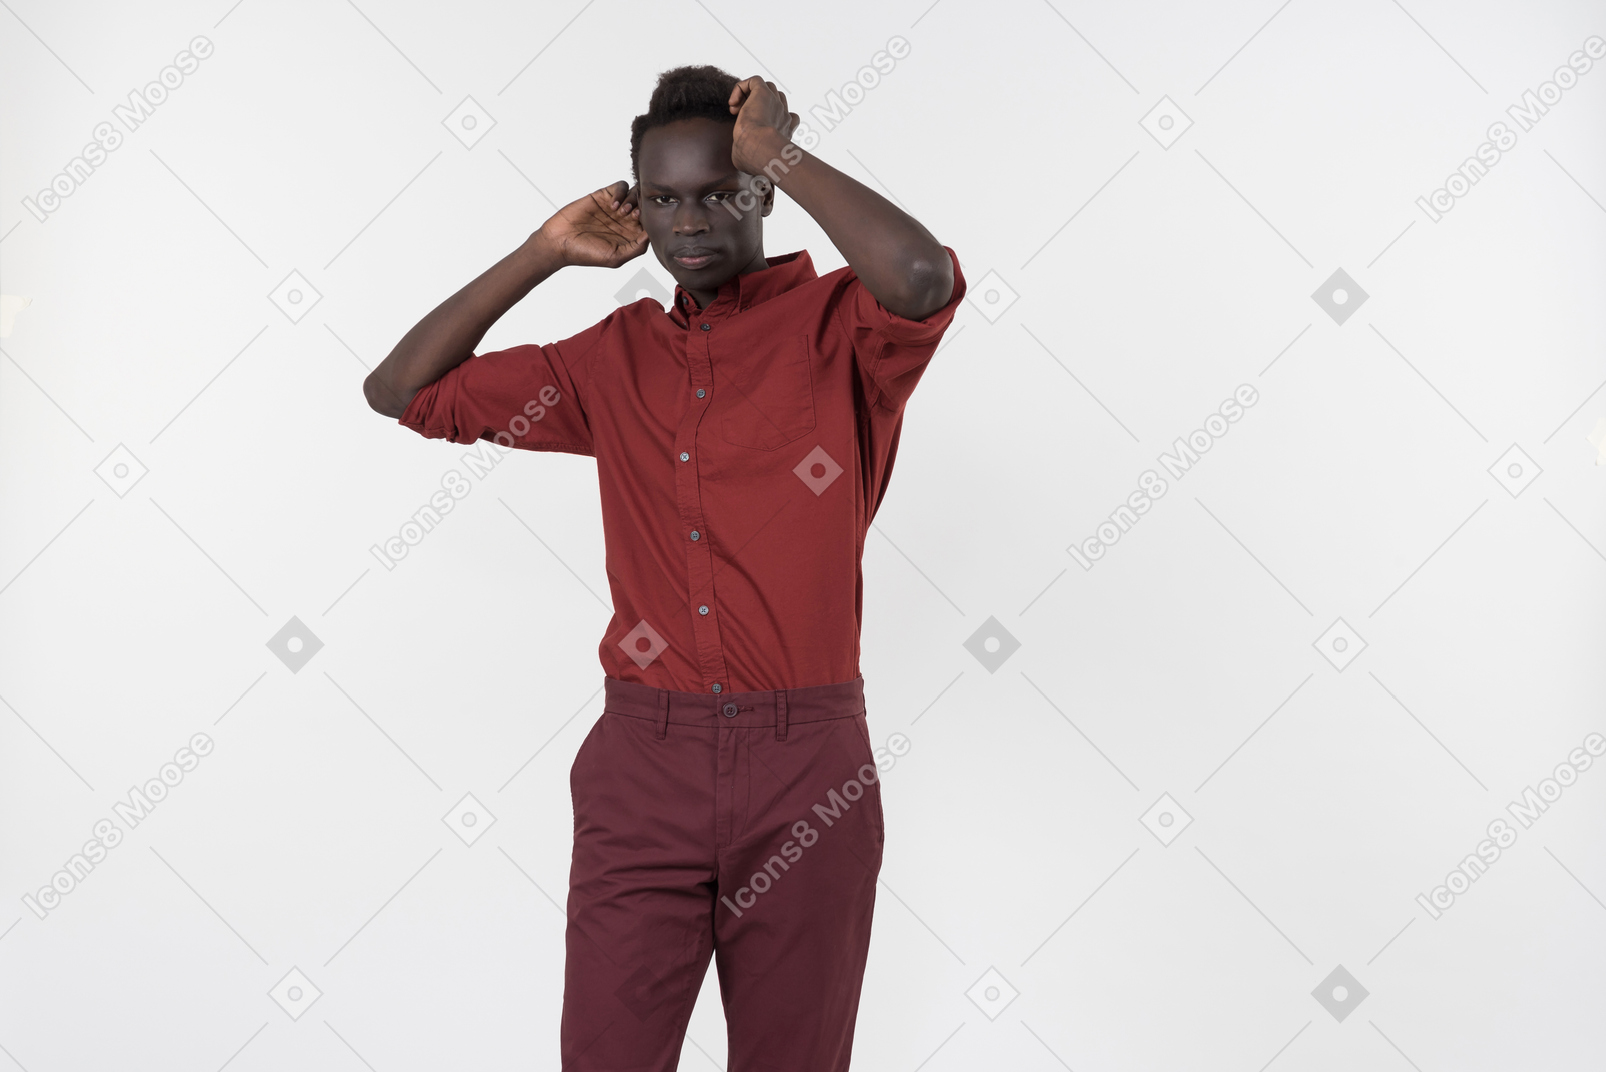 A young black man in a red shirt with rolled up sleeves and dark red pants standing alone on the white background